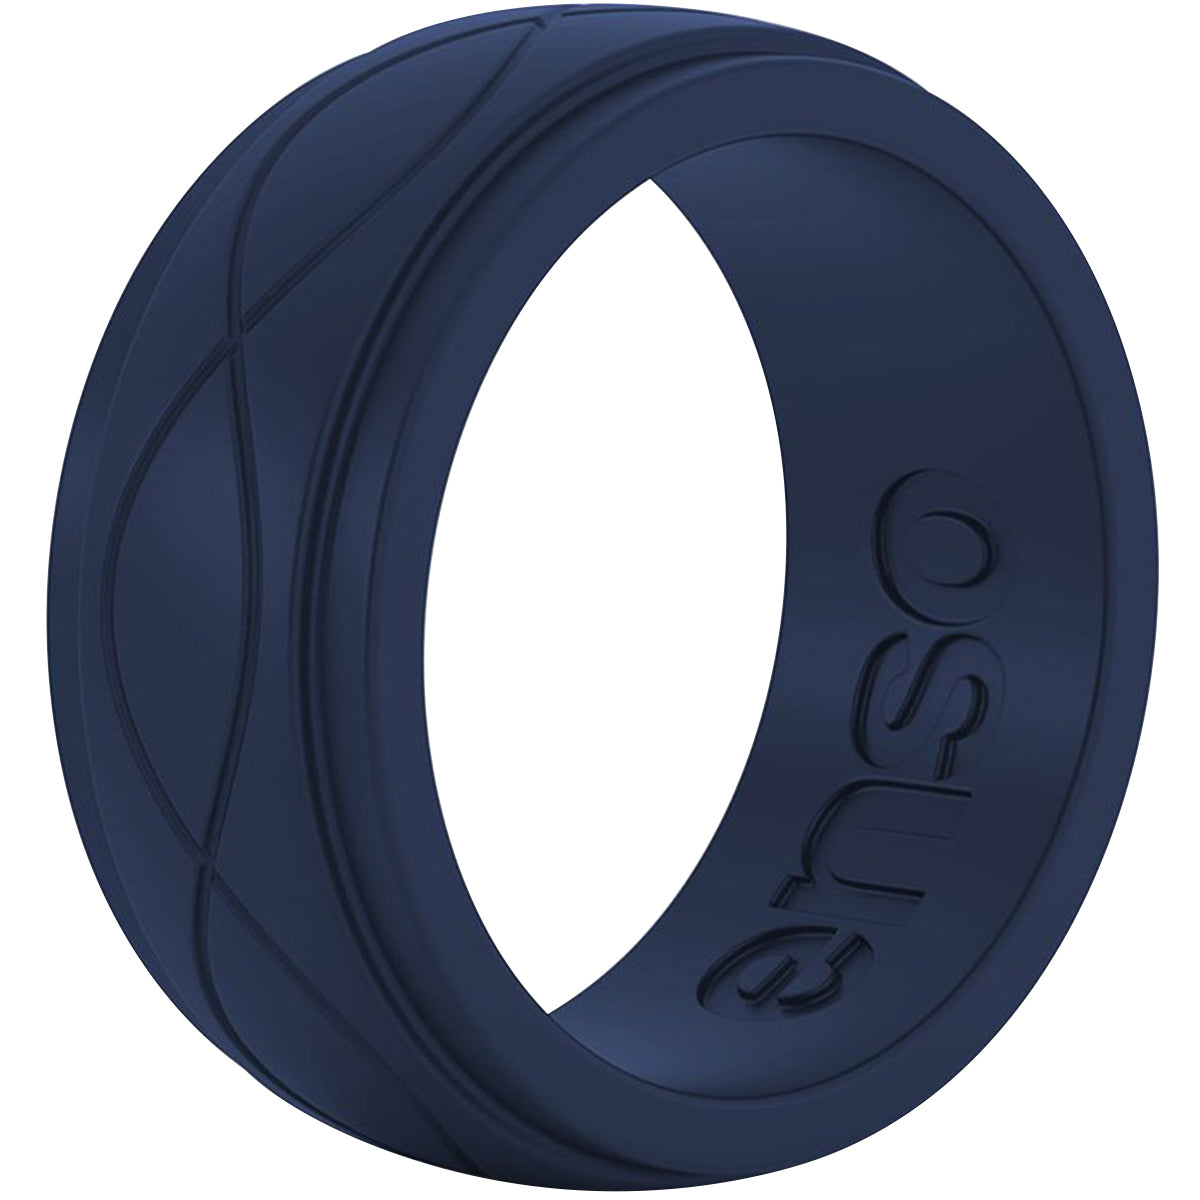 Enso Rings Men's Infinity Series Silicone Ring -  Navy Blue Enso Rings